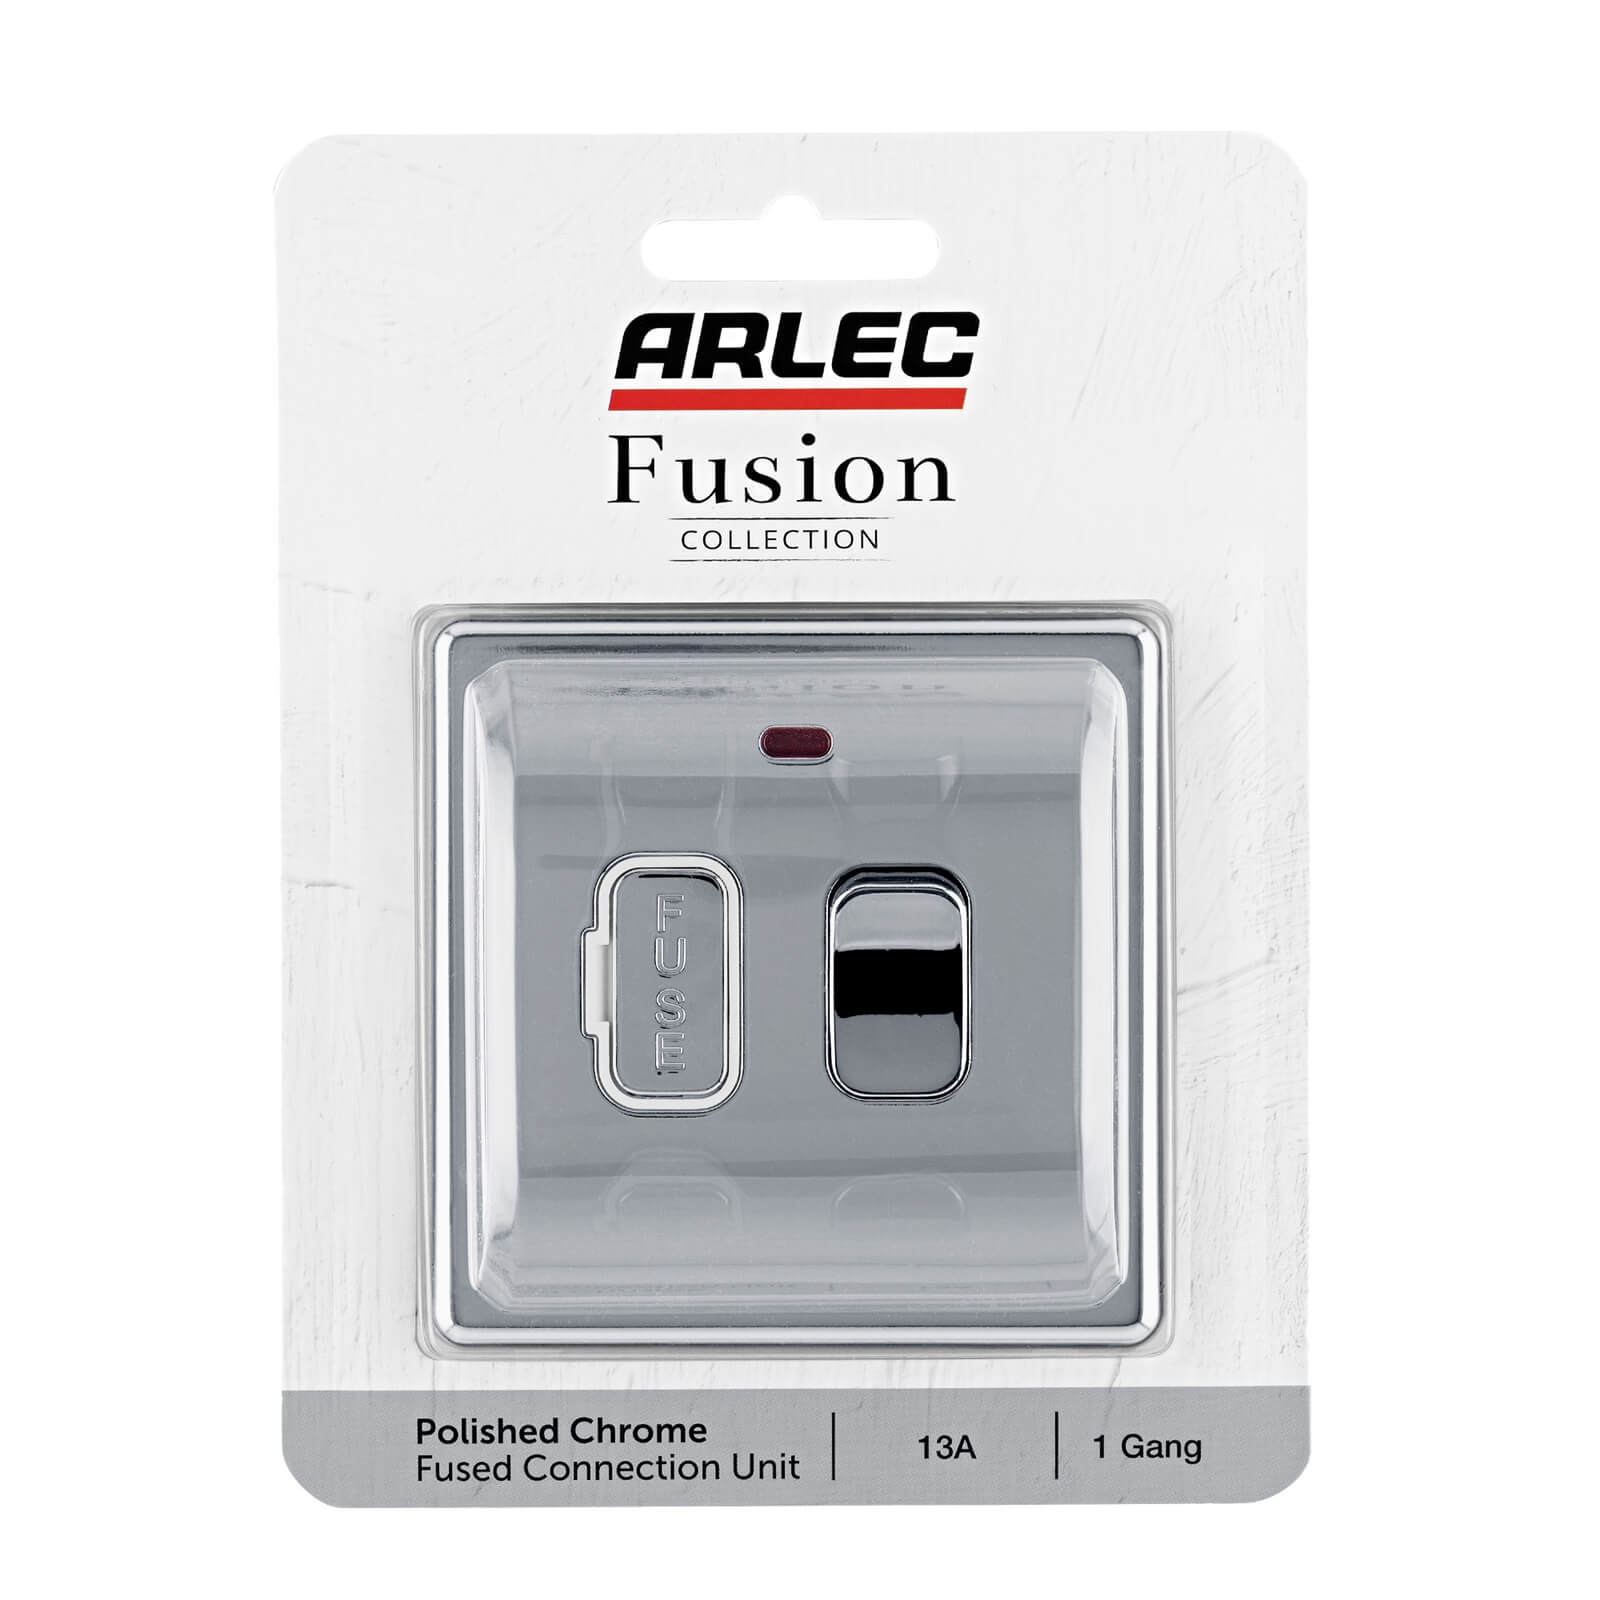 Arlec Fusion 13A Polished Chrome Switched fused connection unit